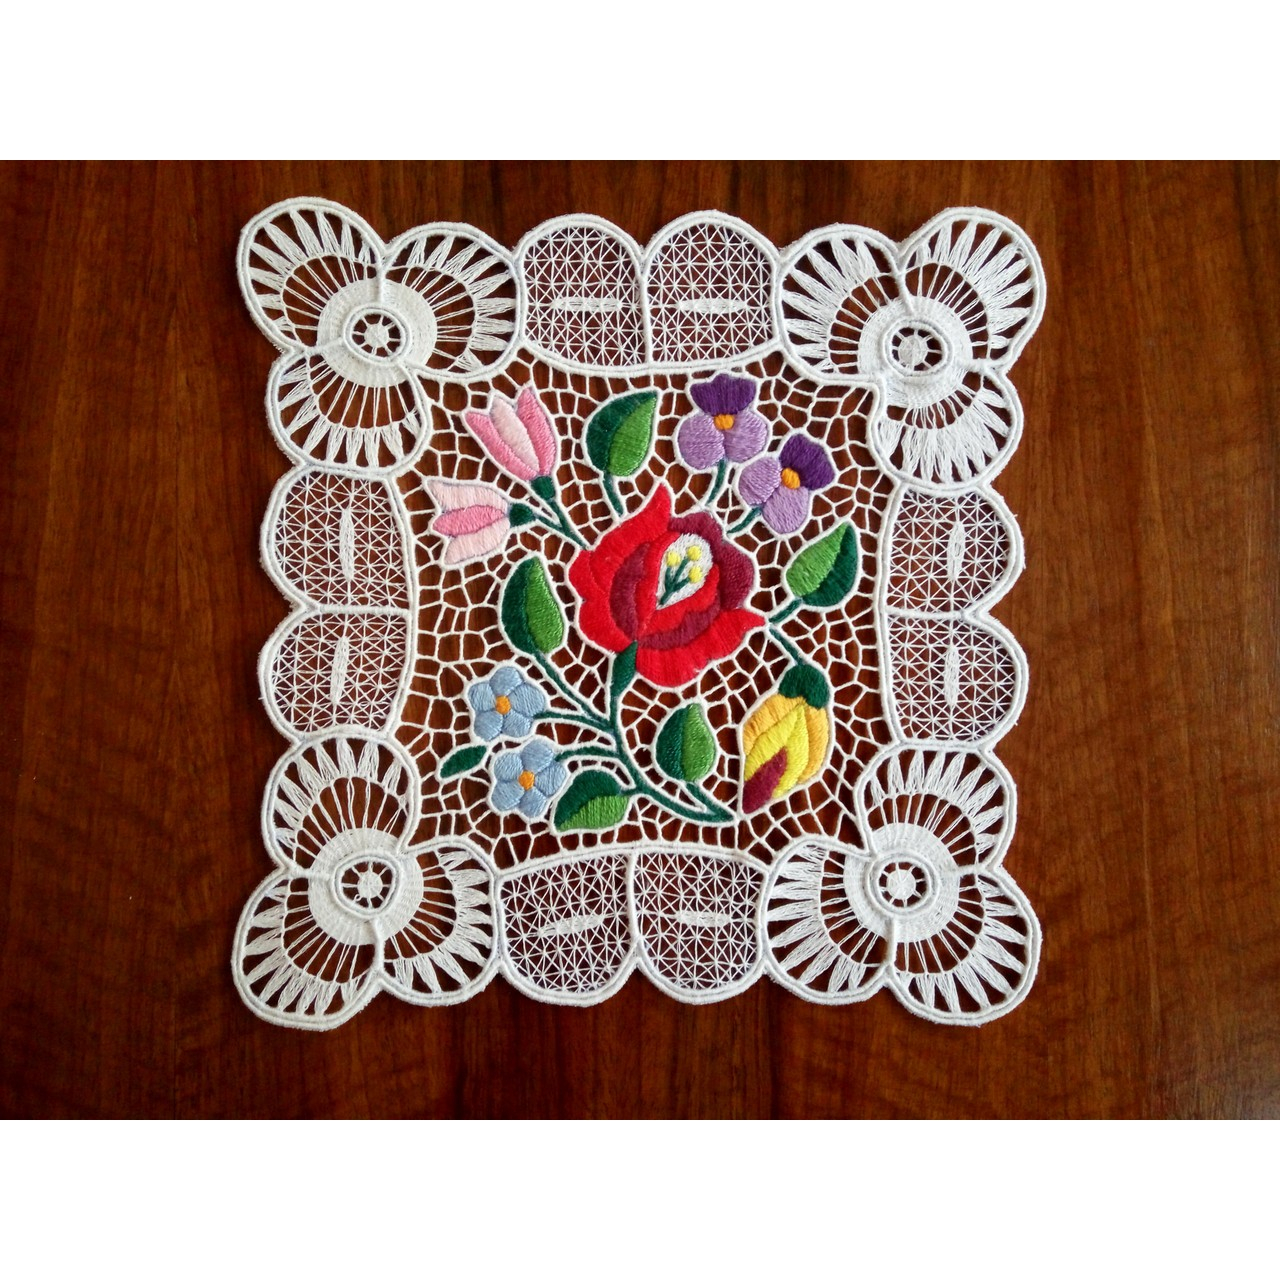 Cutwork Embroidery Patterns Kalocsa Lace Richelieu Doily With Authentic Hungarian Embroidery